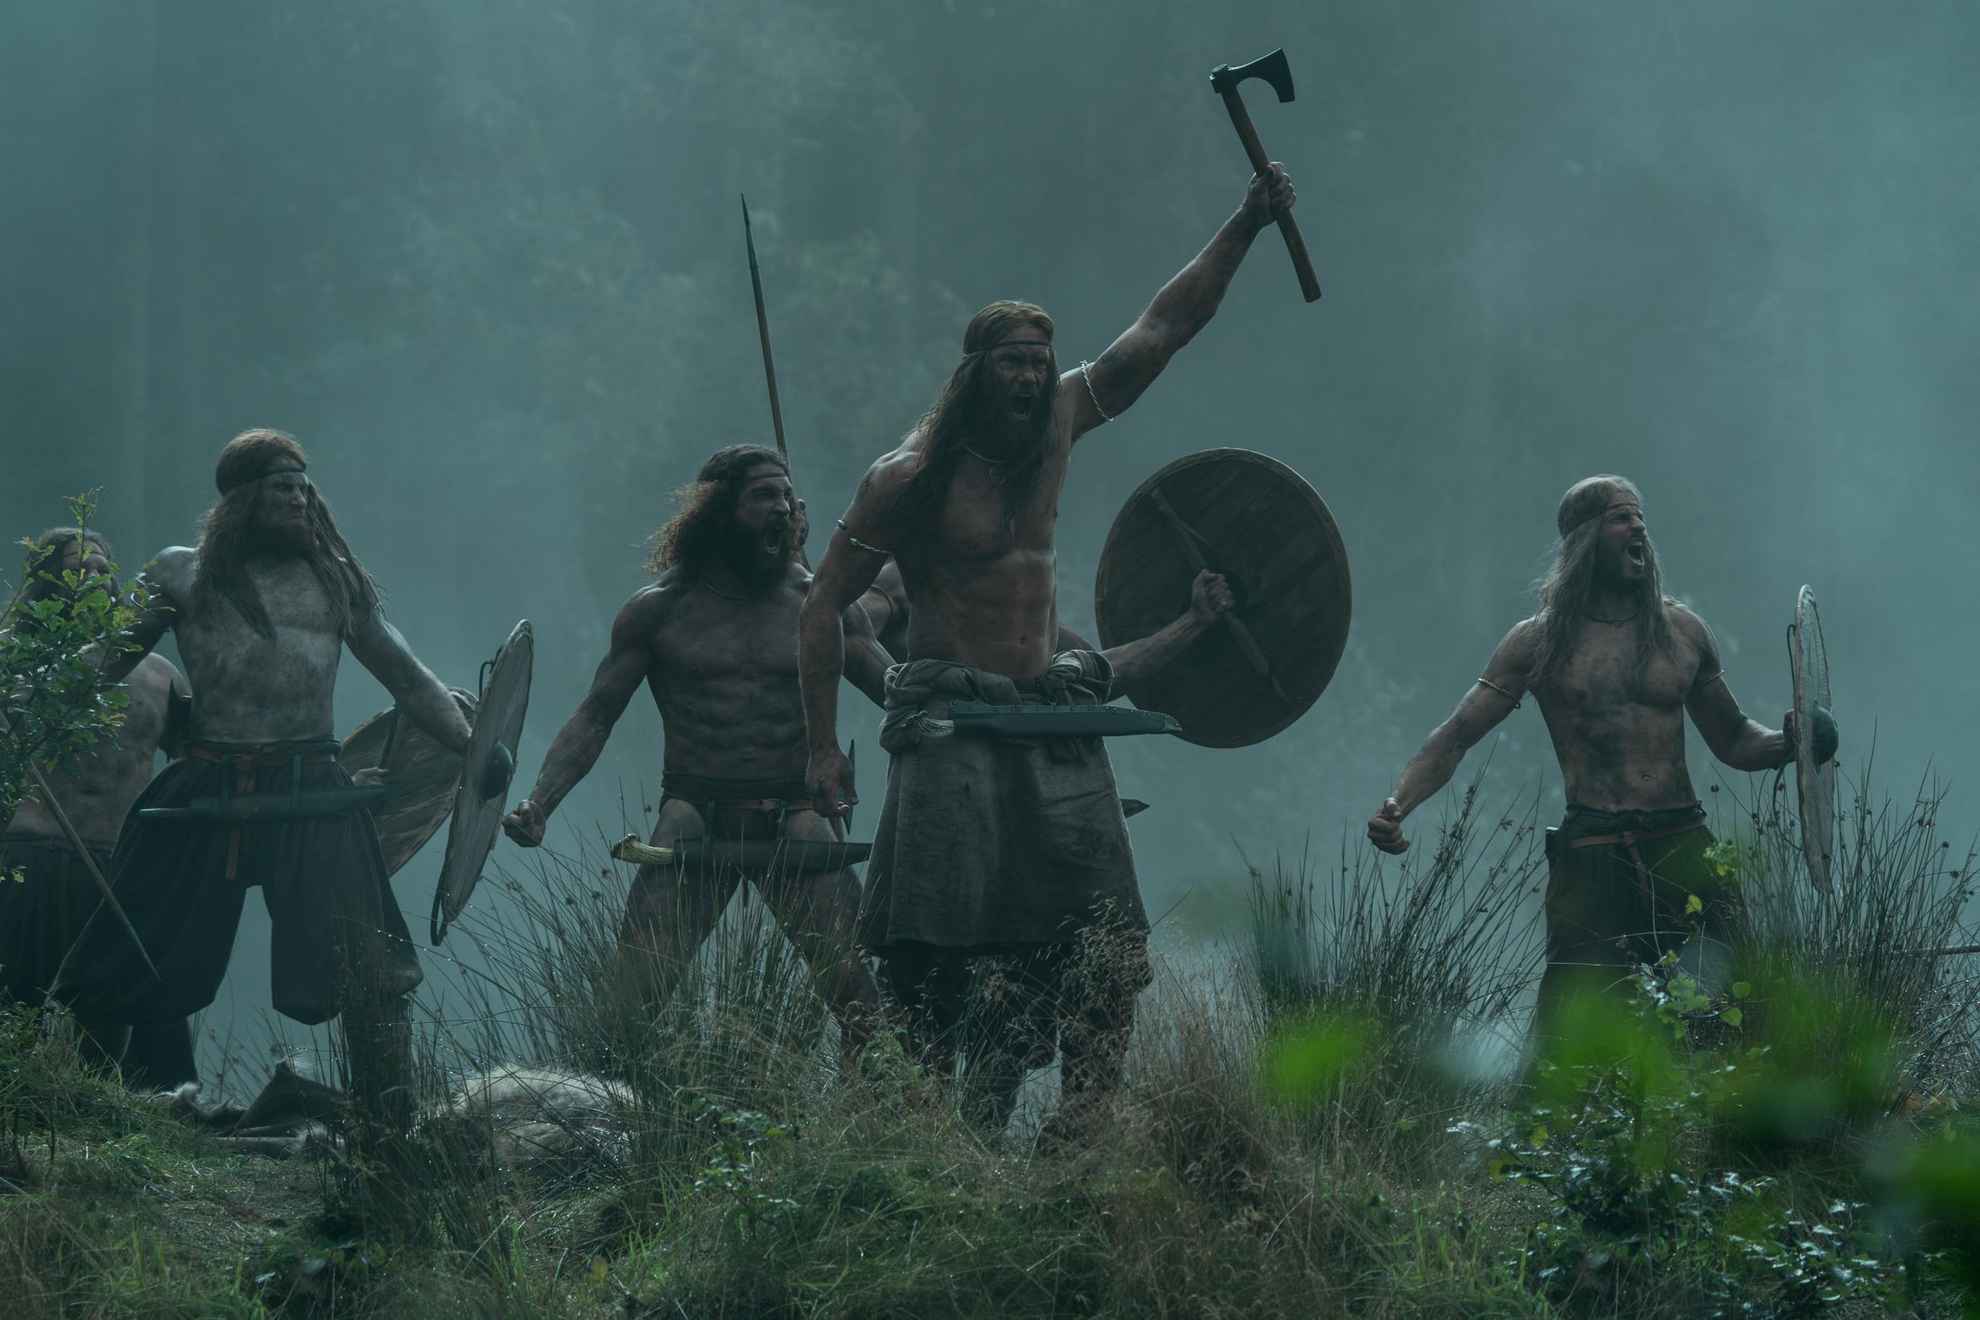 Vikings preparing for battle. An image from the movie The Northman.